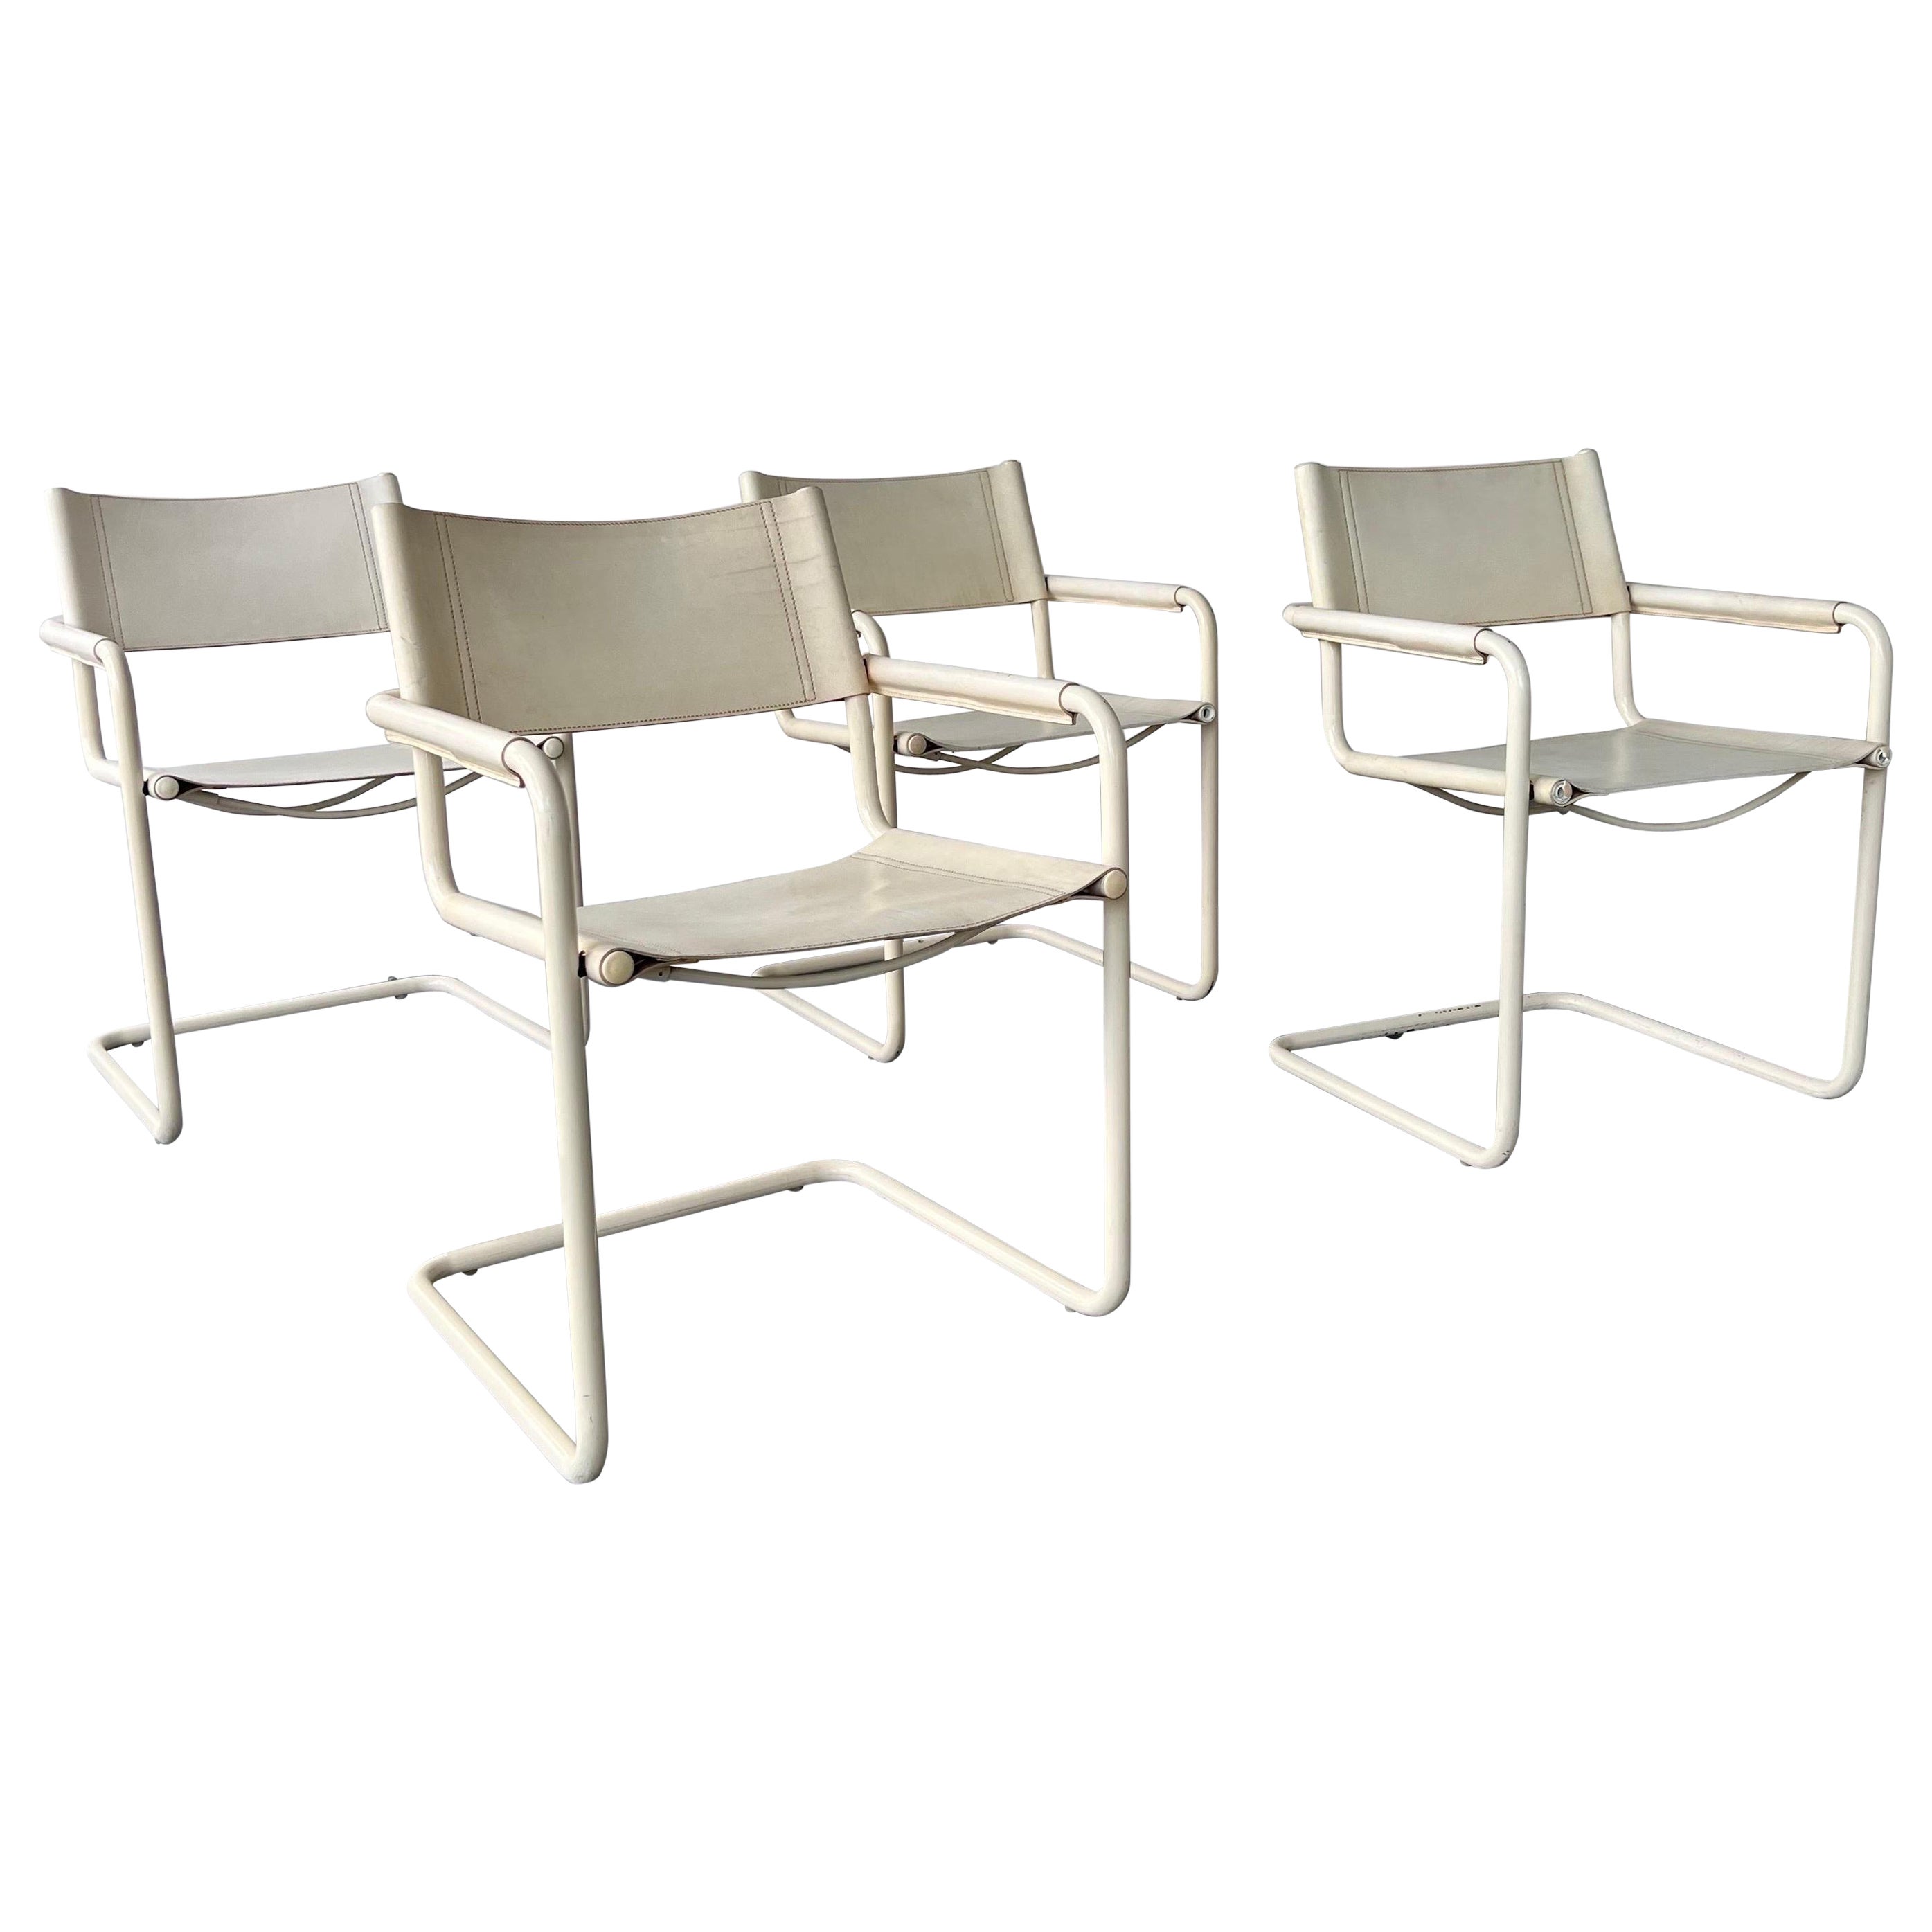 Set of 4 Cantilevered MG5 Dining Chairs Designed by Breuer Made by Matteo Grassi